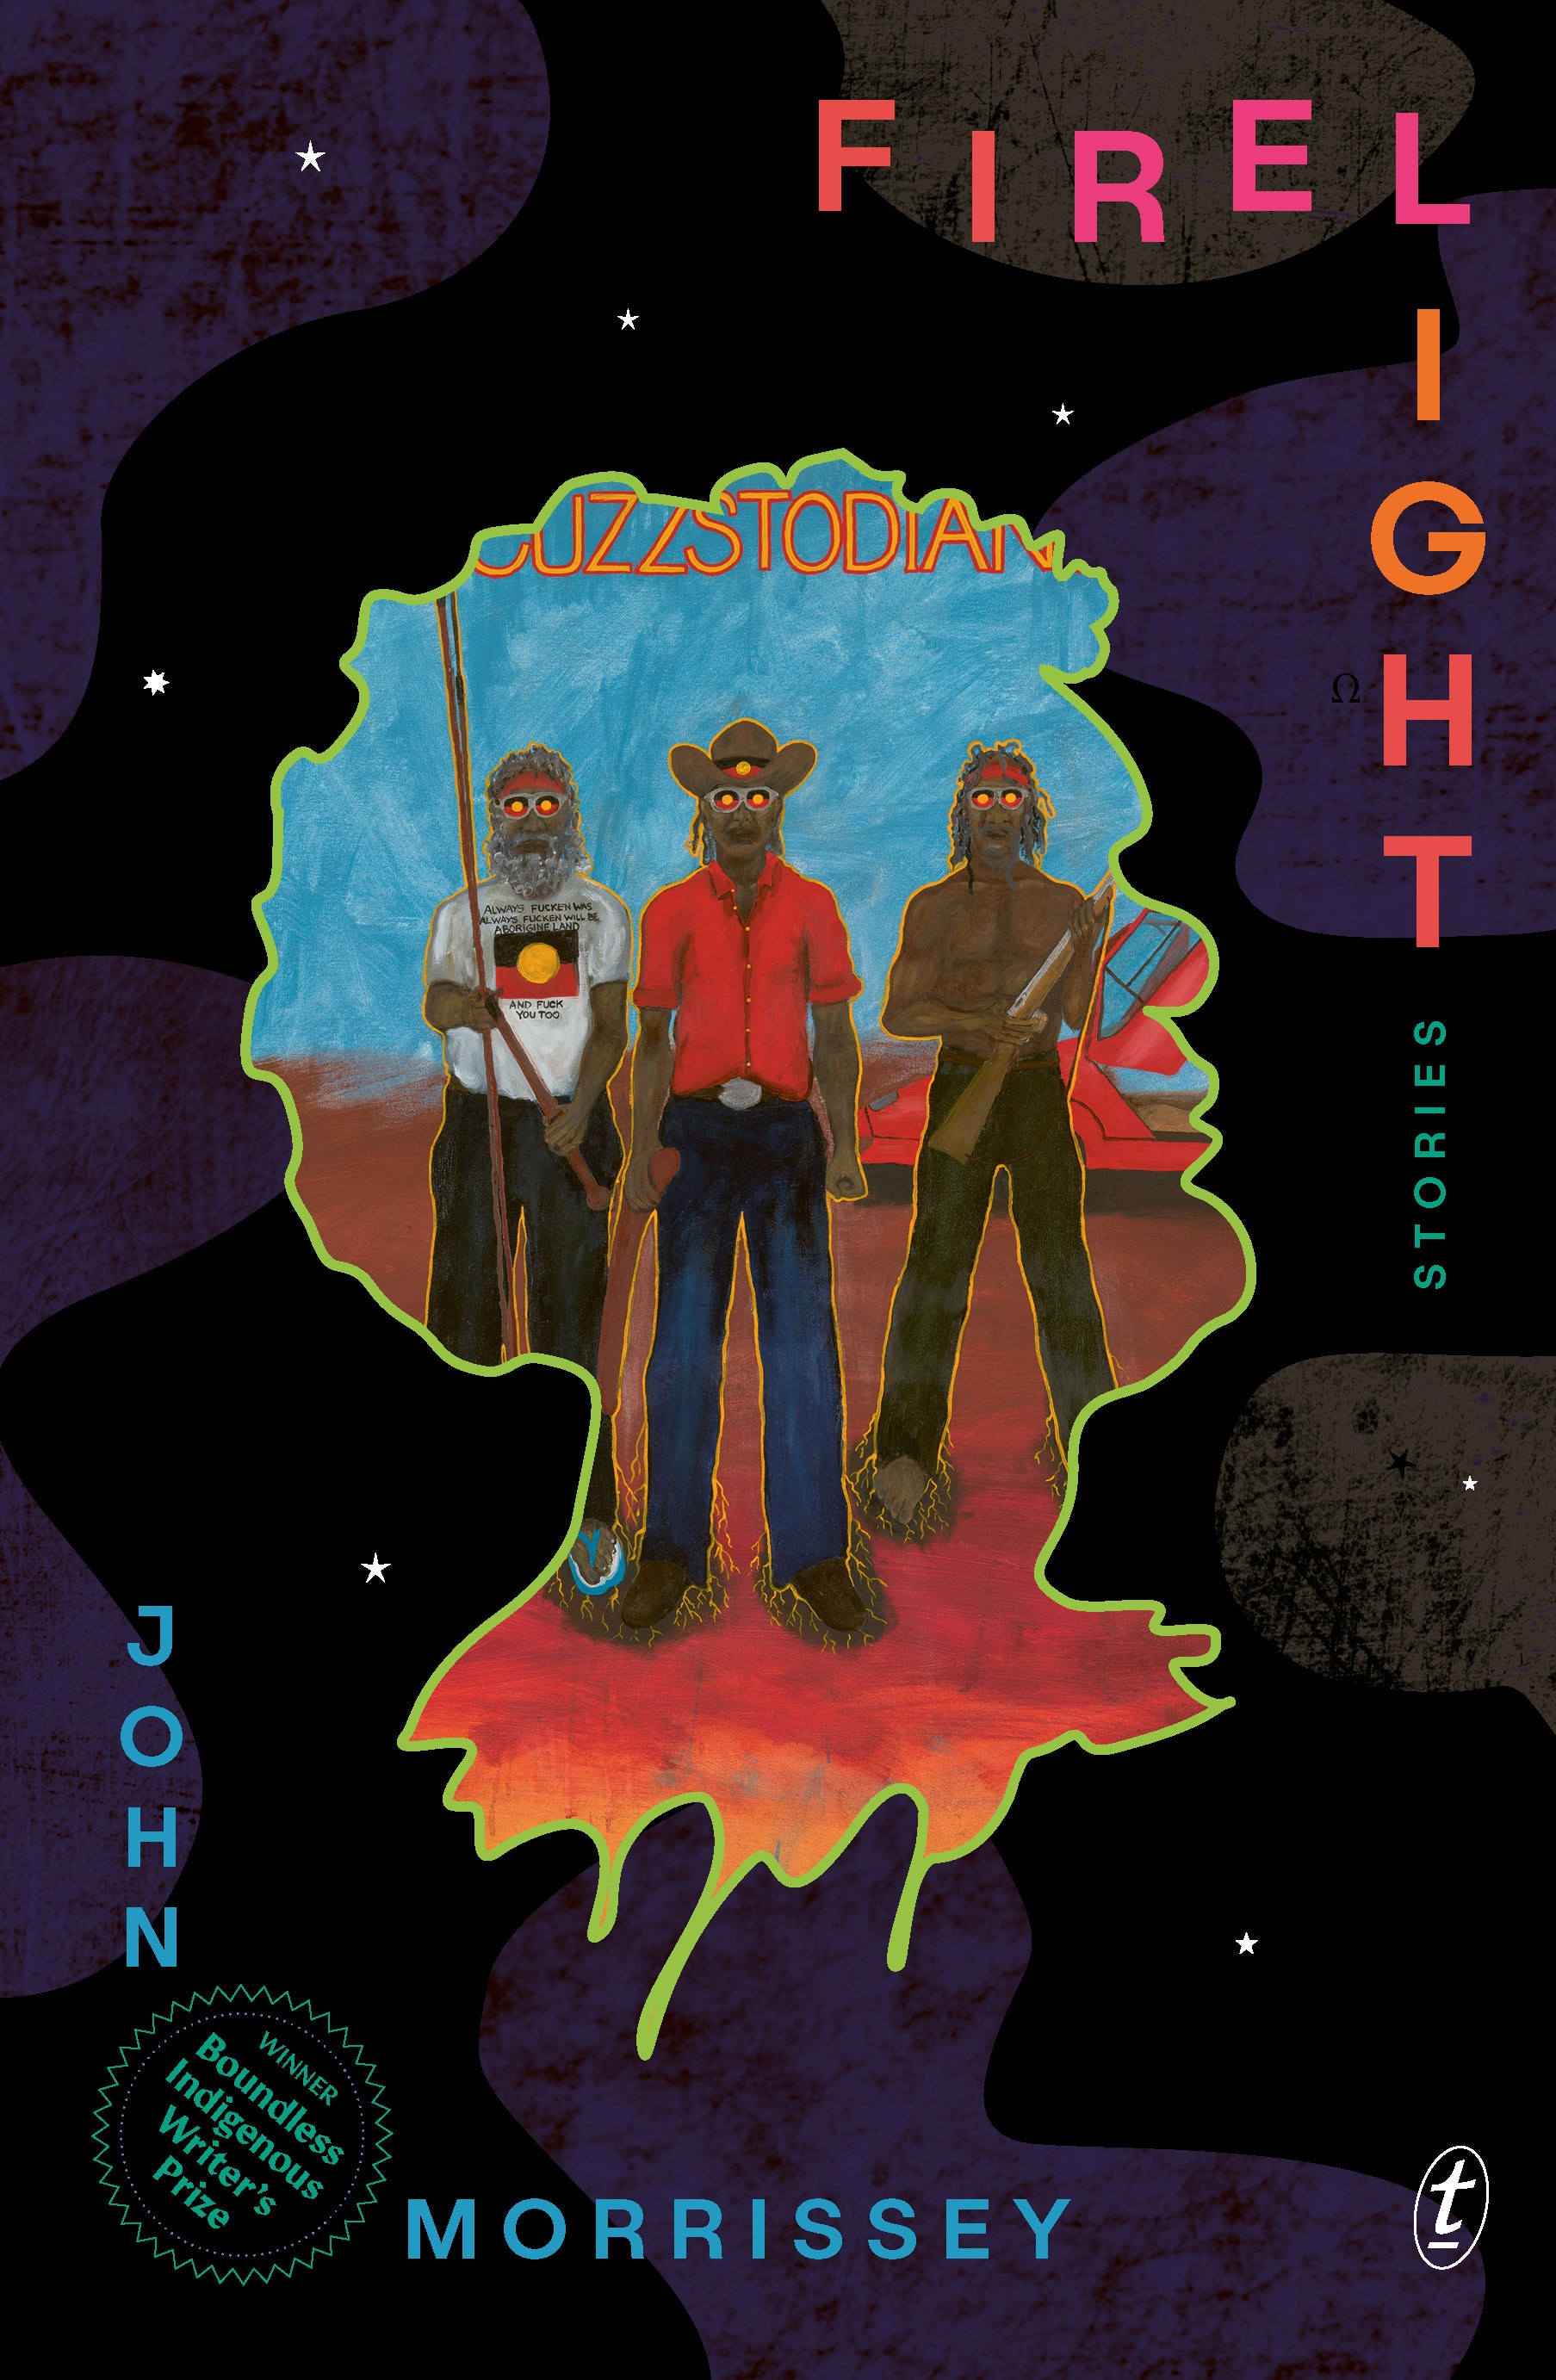 A book cover showing an illustration of three First Nations men set in the silhouette of a person's profile